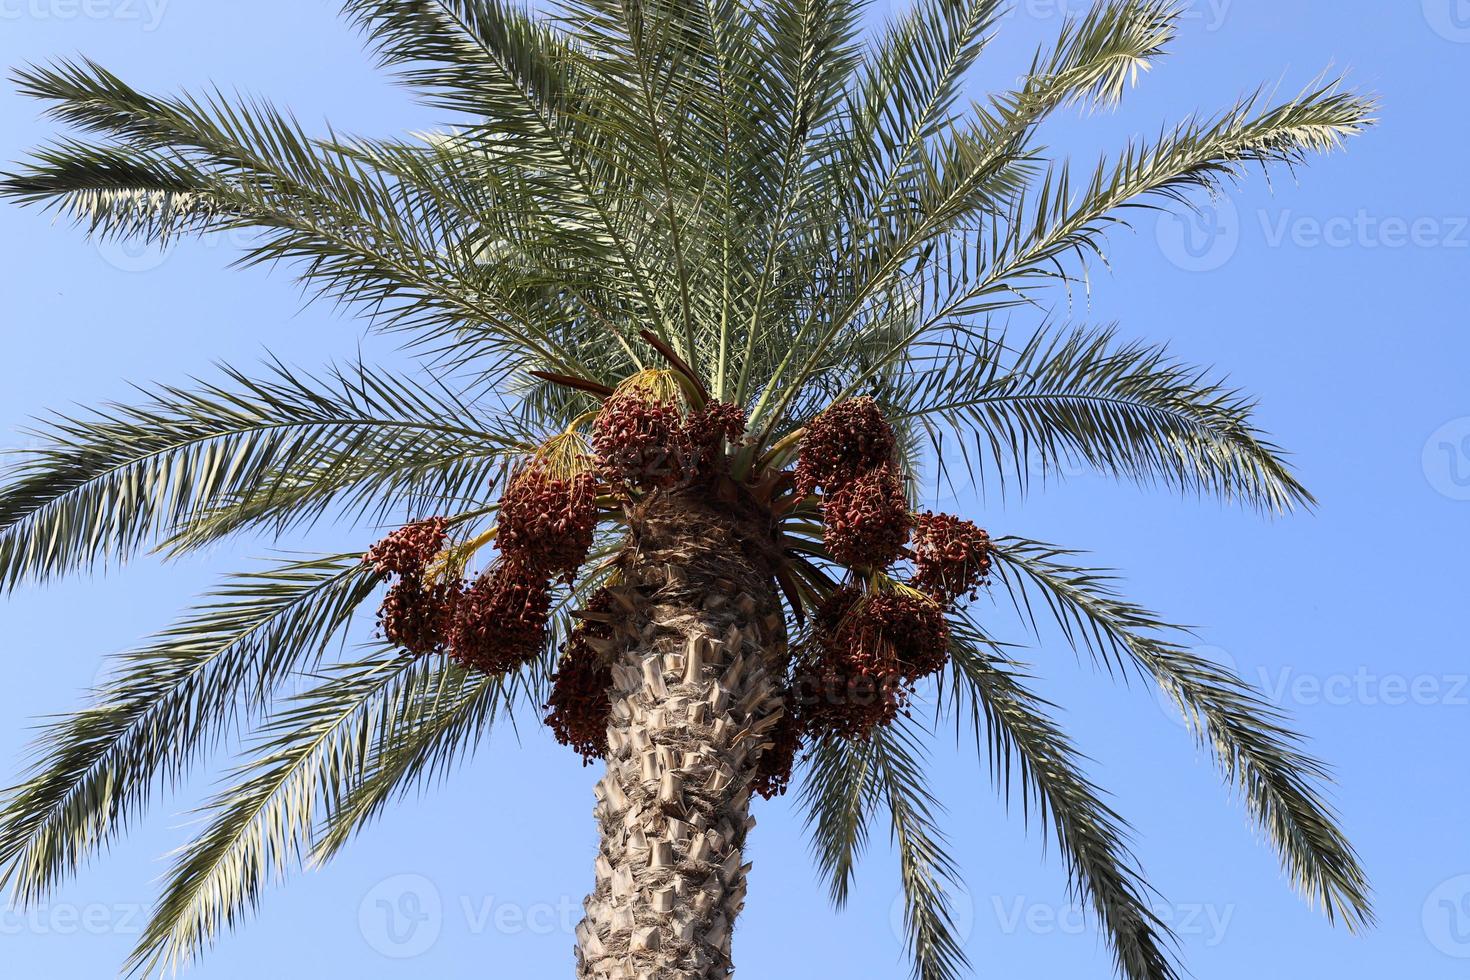 Rich harvest of dates on palm trees in the city park. photo